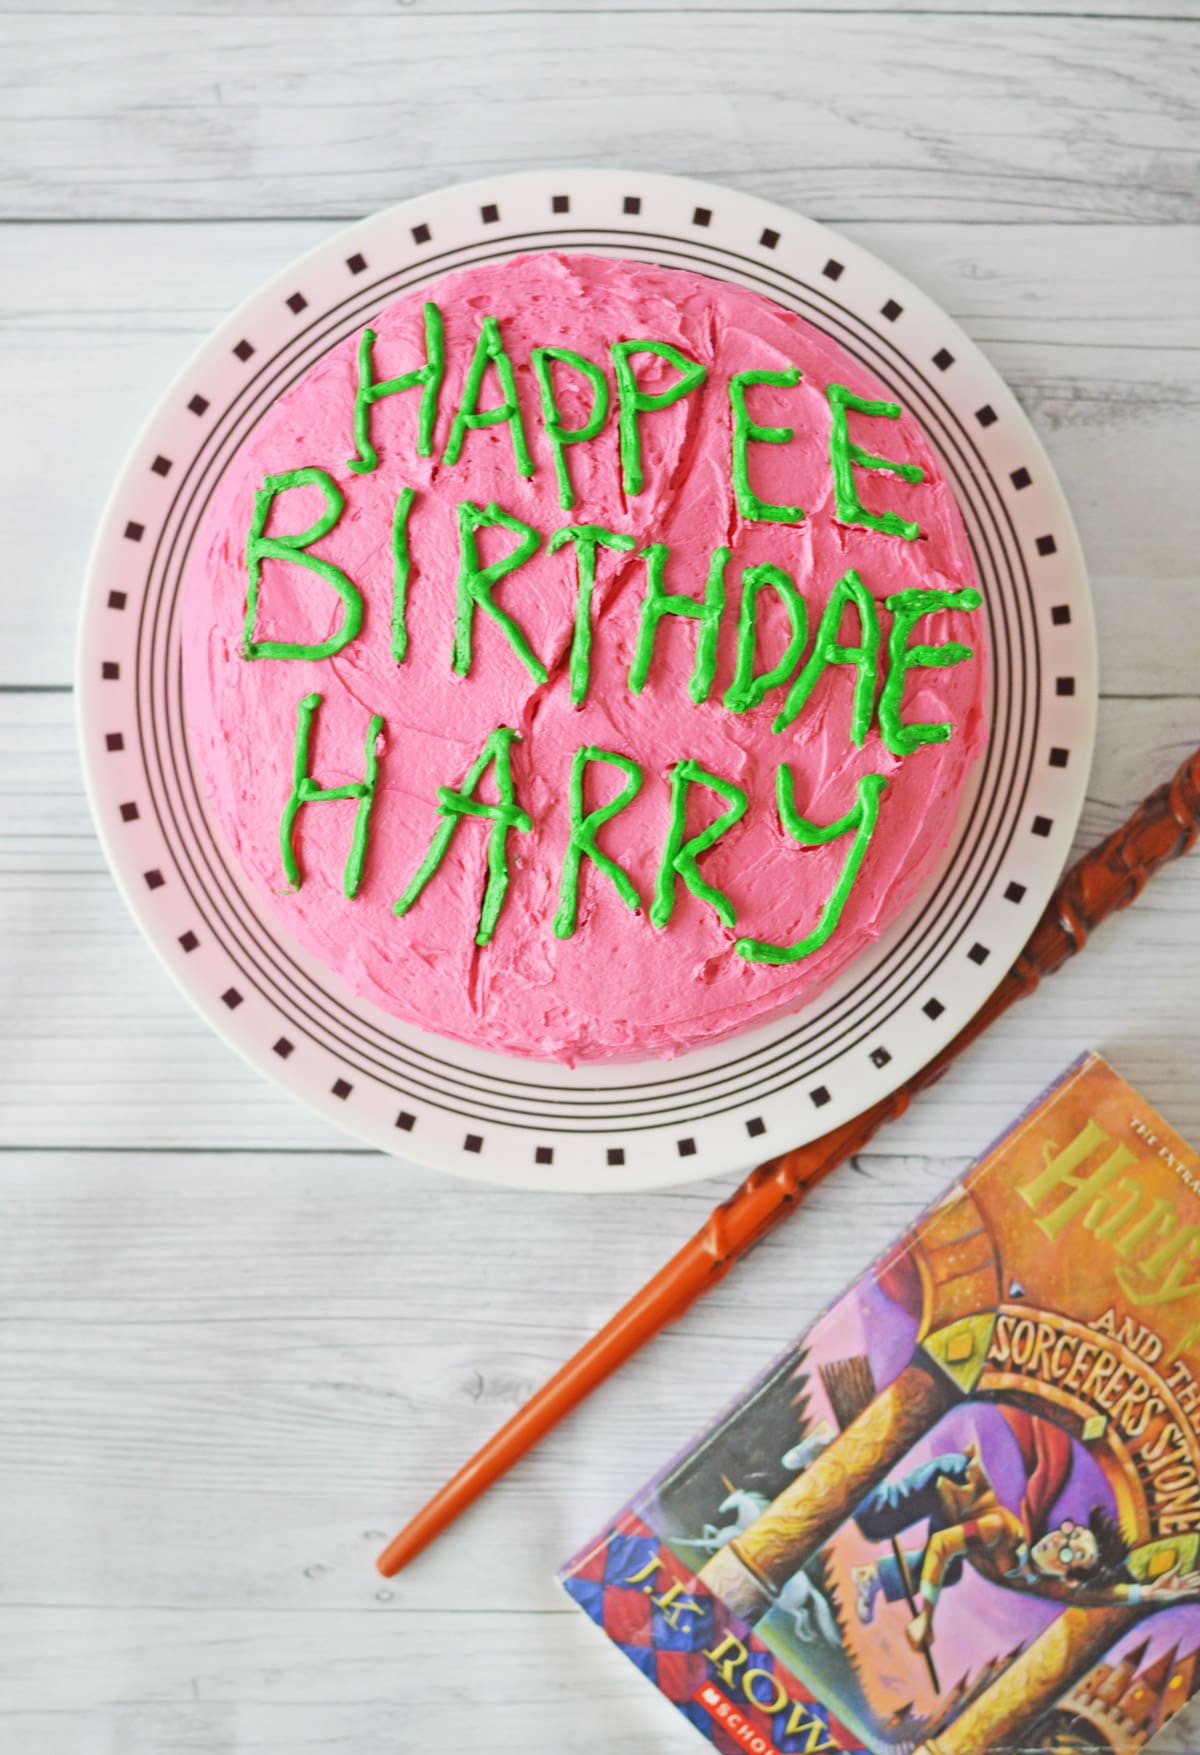 Harry Potter birthday cake with wand and book